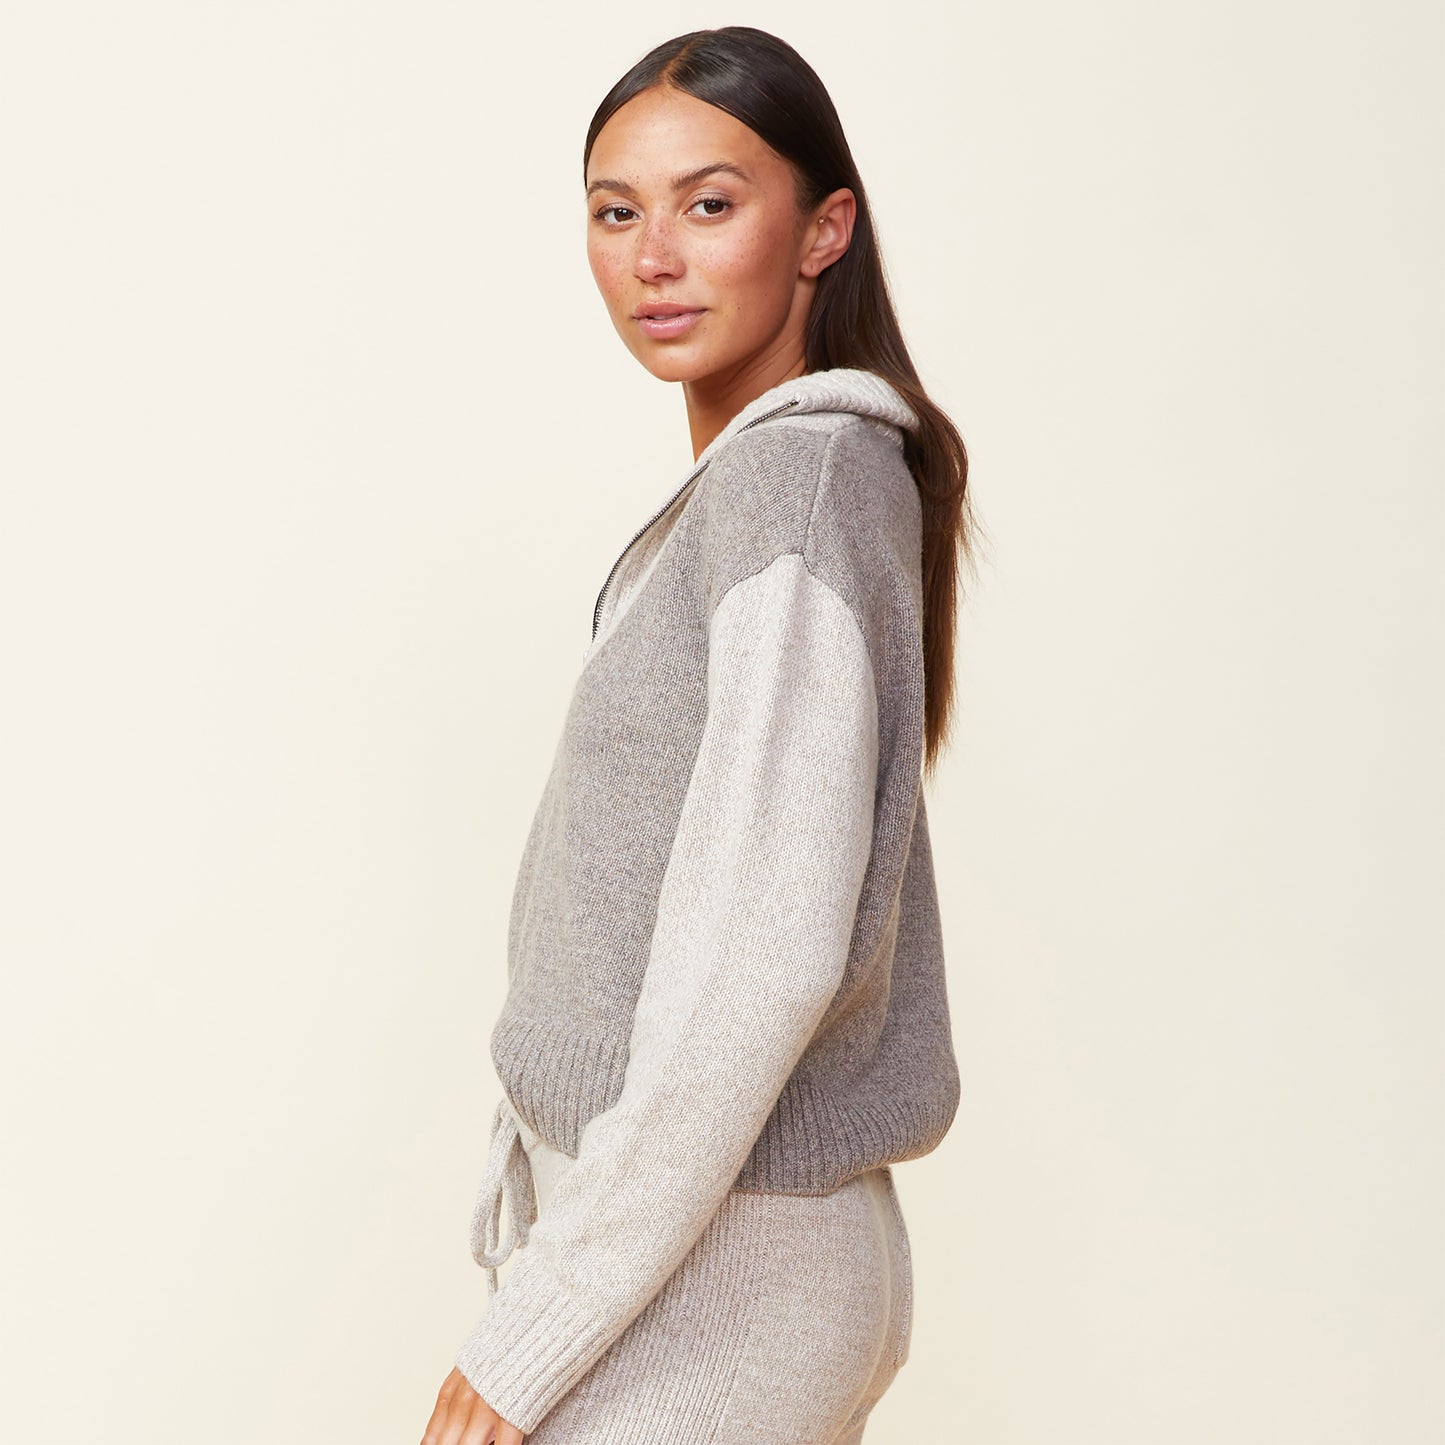 Wool Cashmere Marled Colorblock Half Zip Sweater